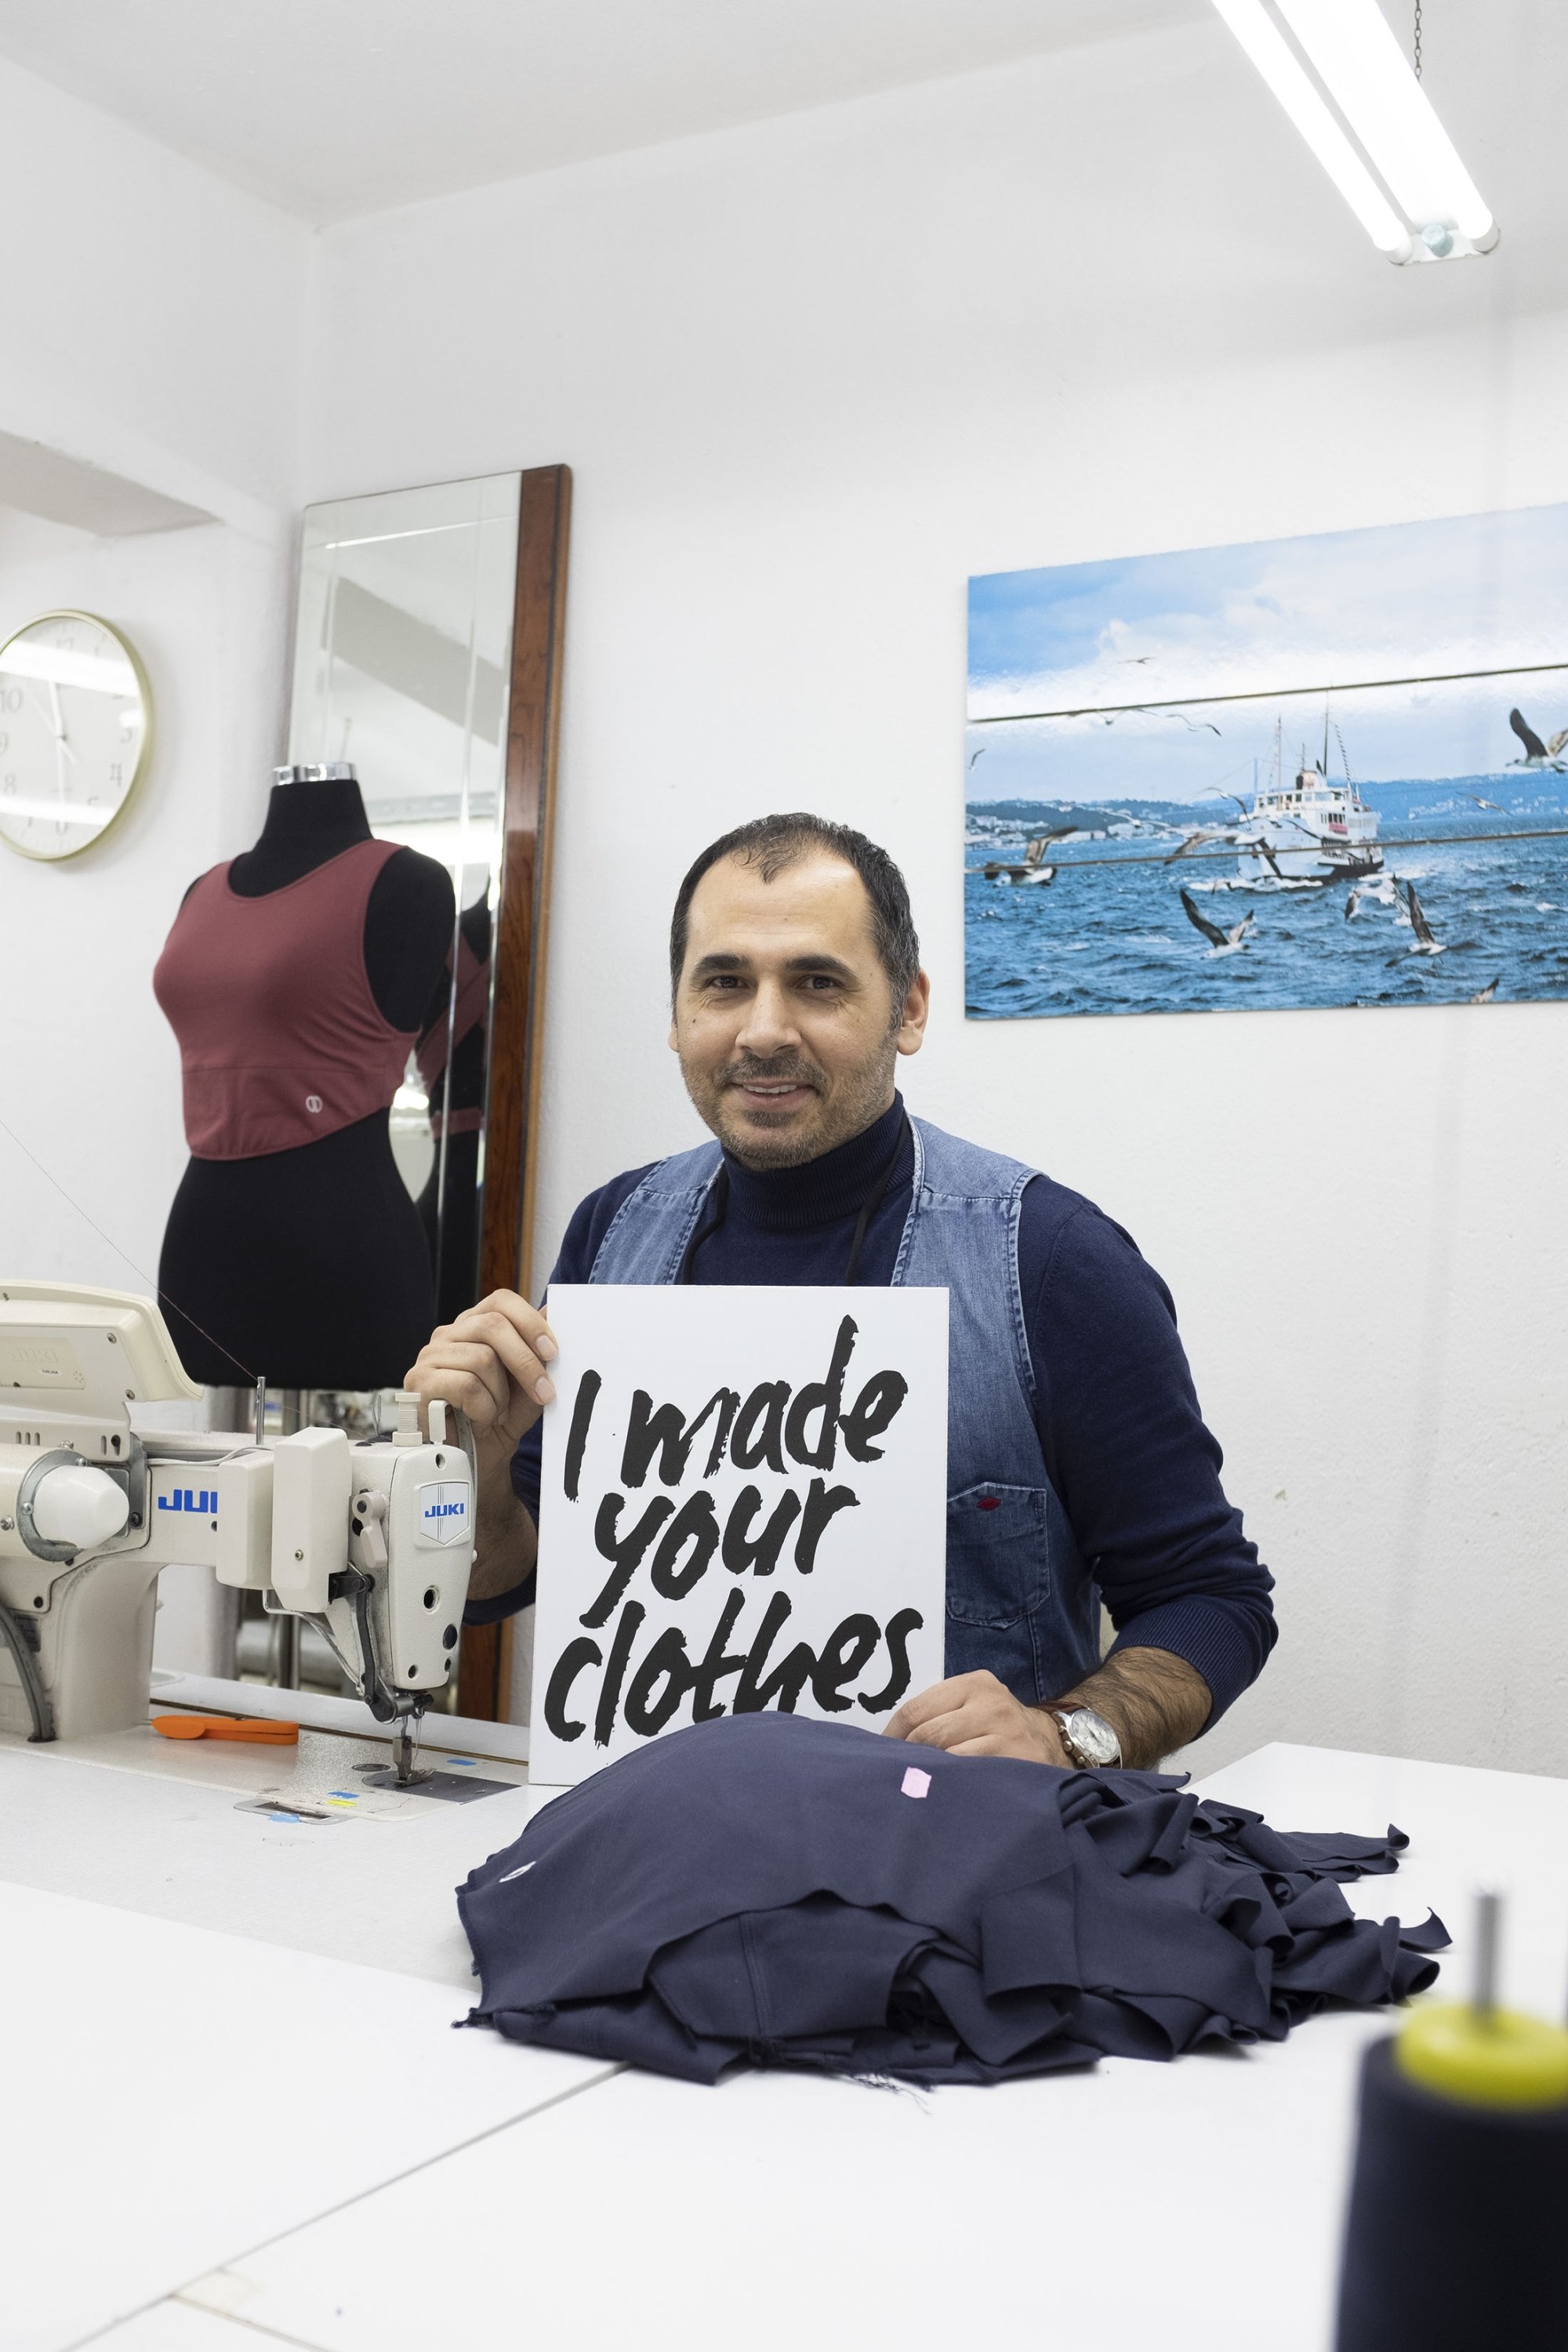 Master tailor Birol holds a sign that reads 'I made your clothes.' (Courtesy of Ezgi Utan)